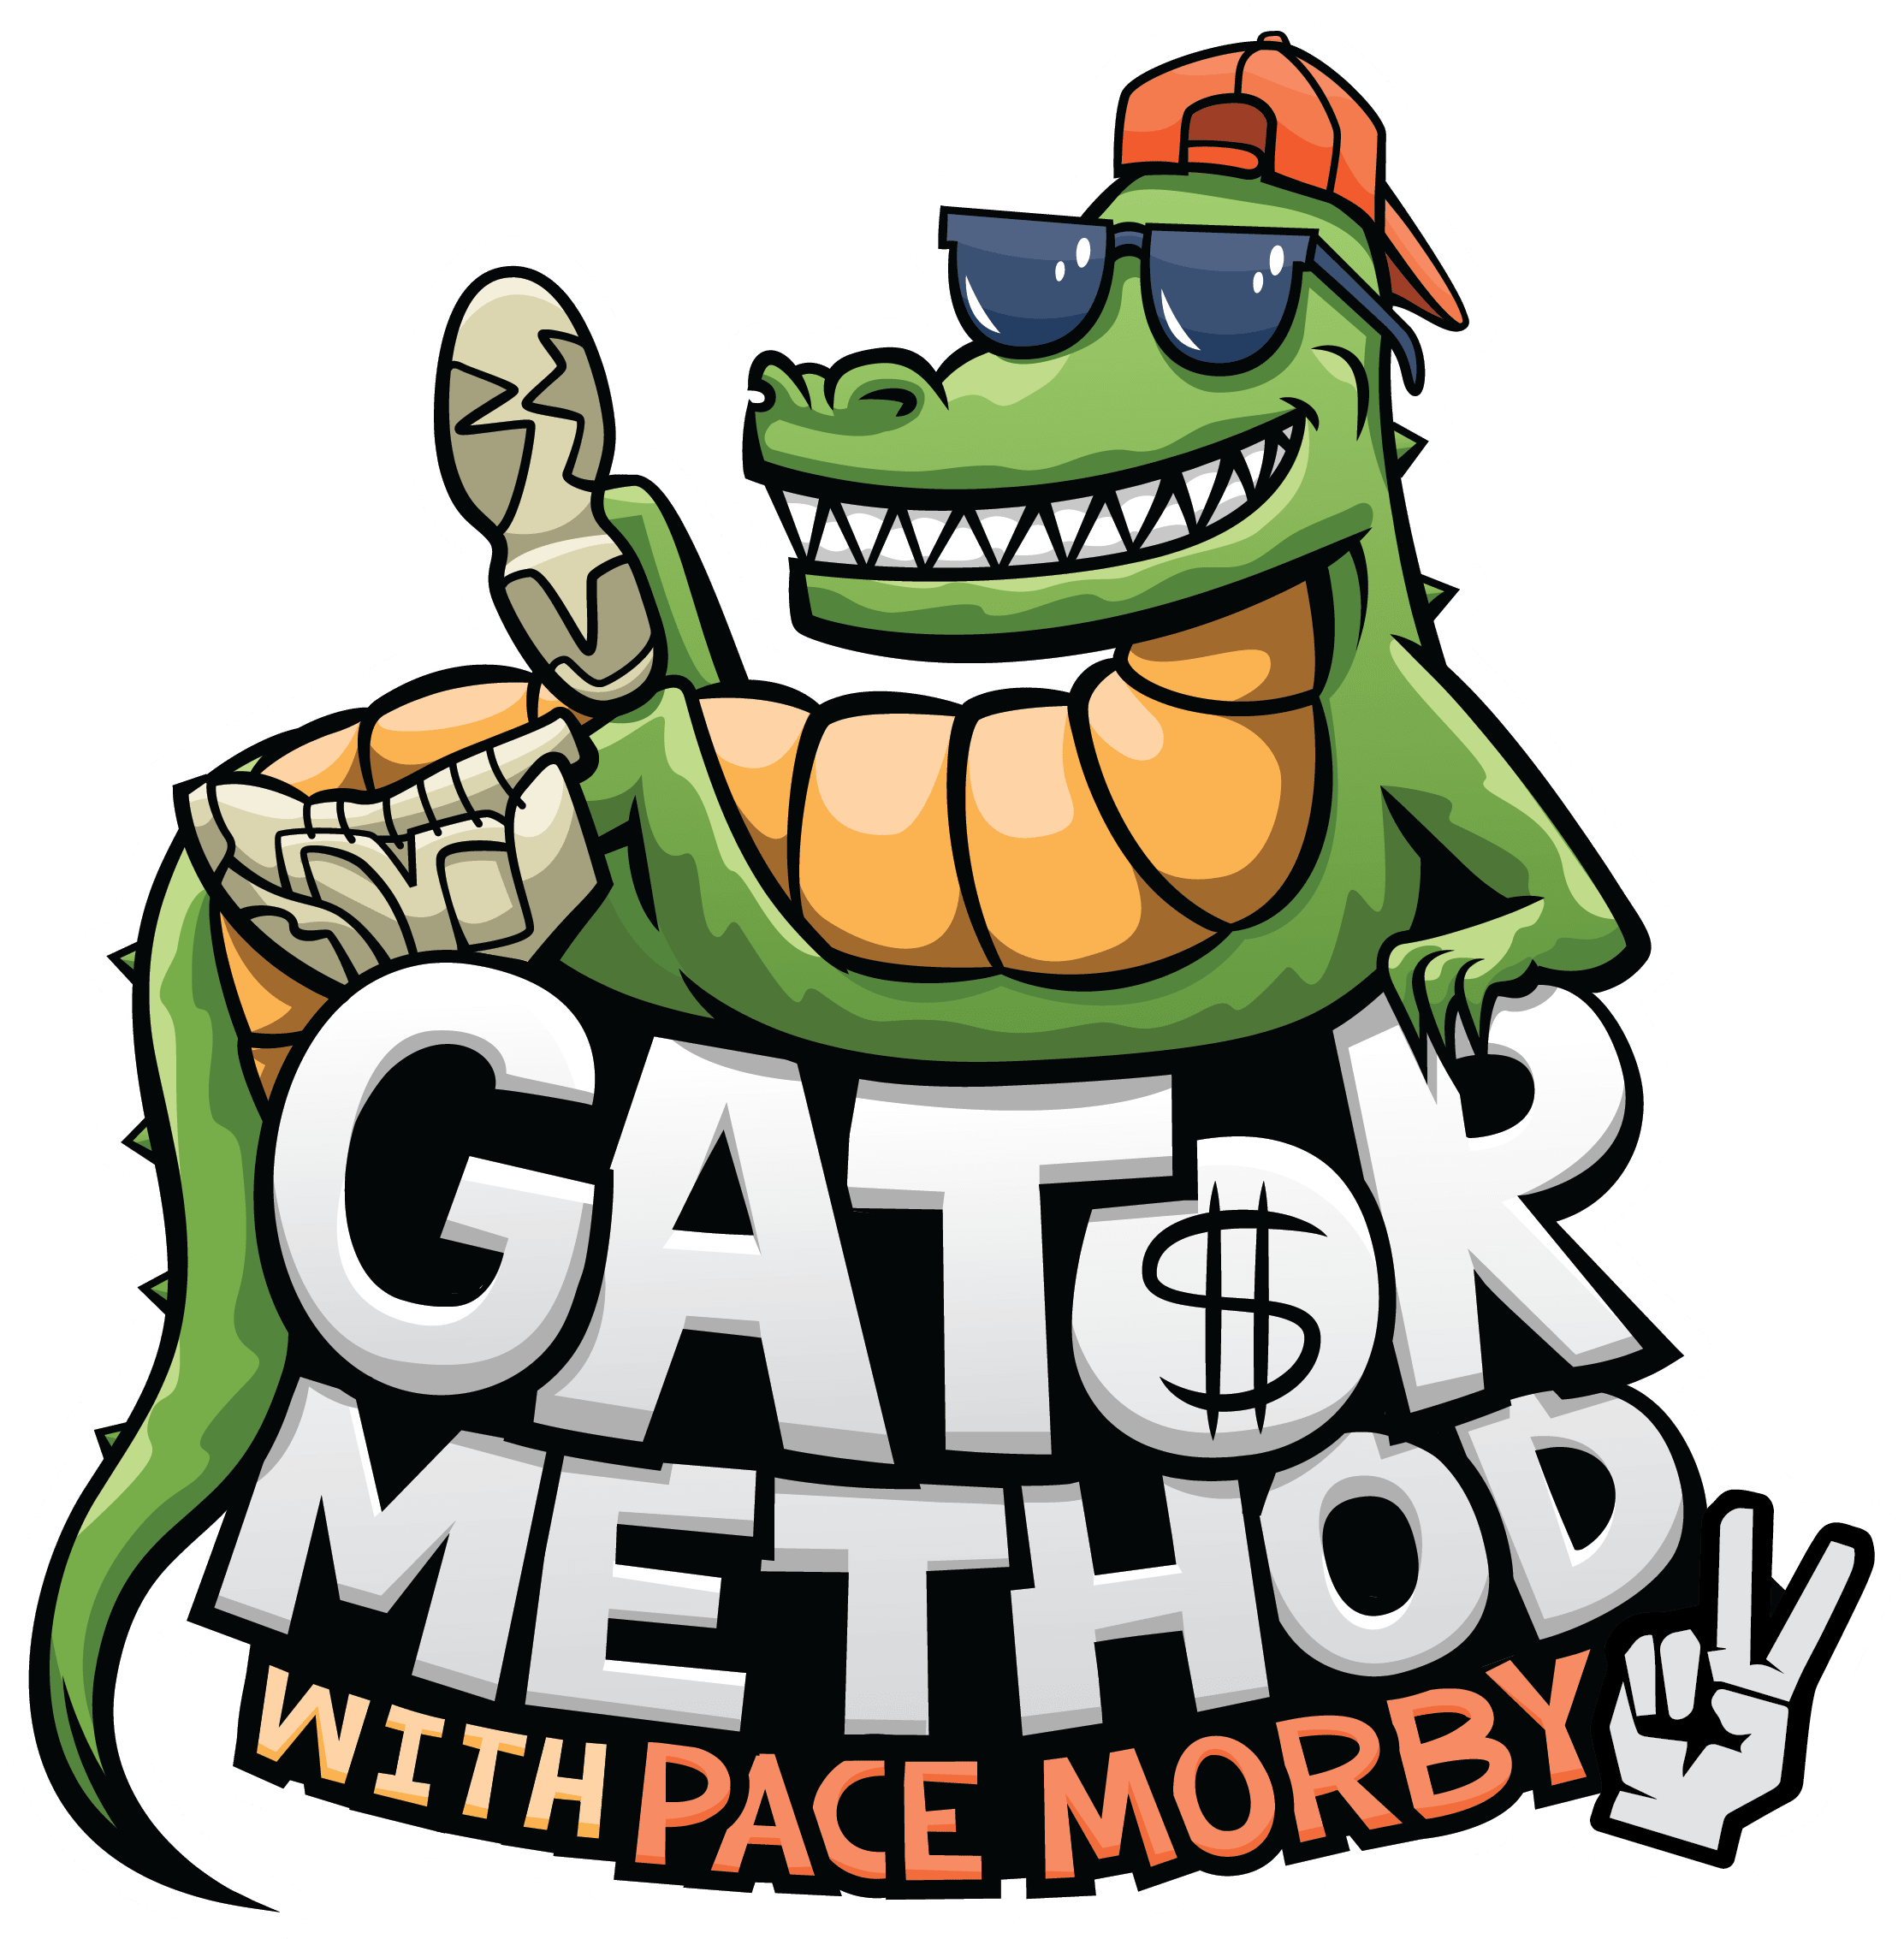 Pace Morby - Gator Method - Supporting Your Learning and Development